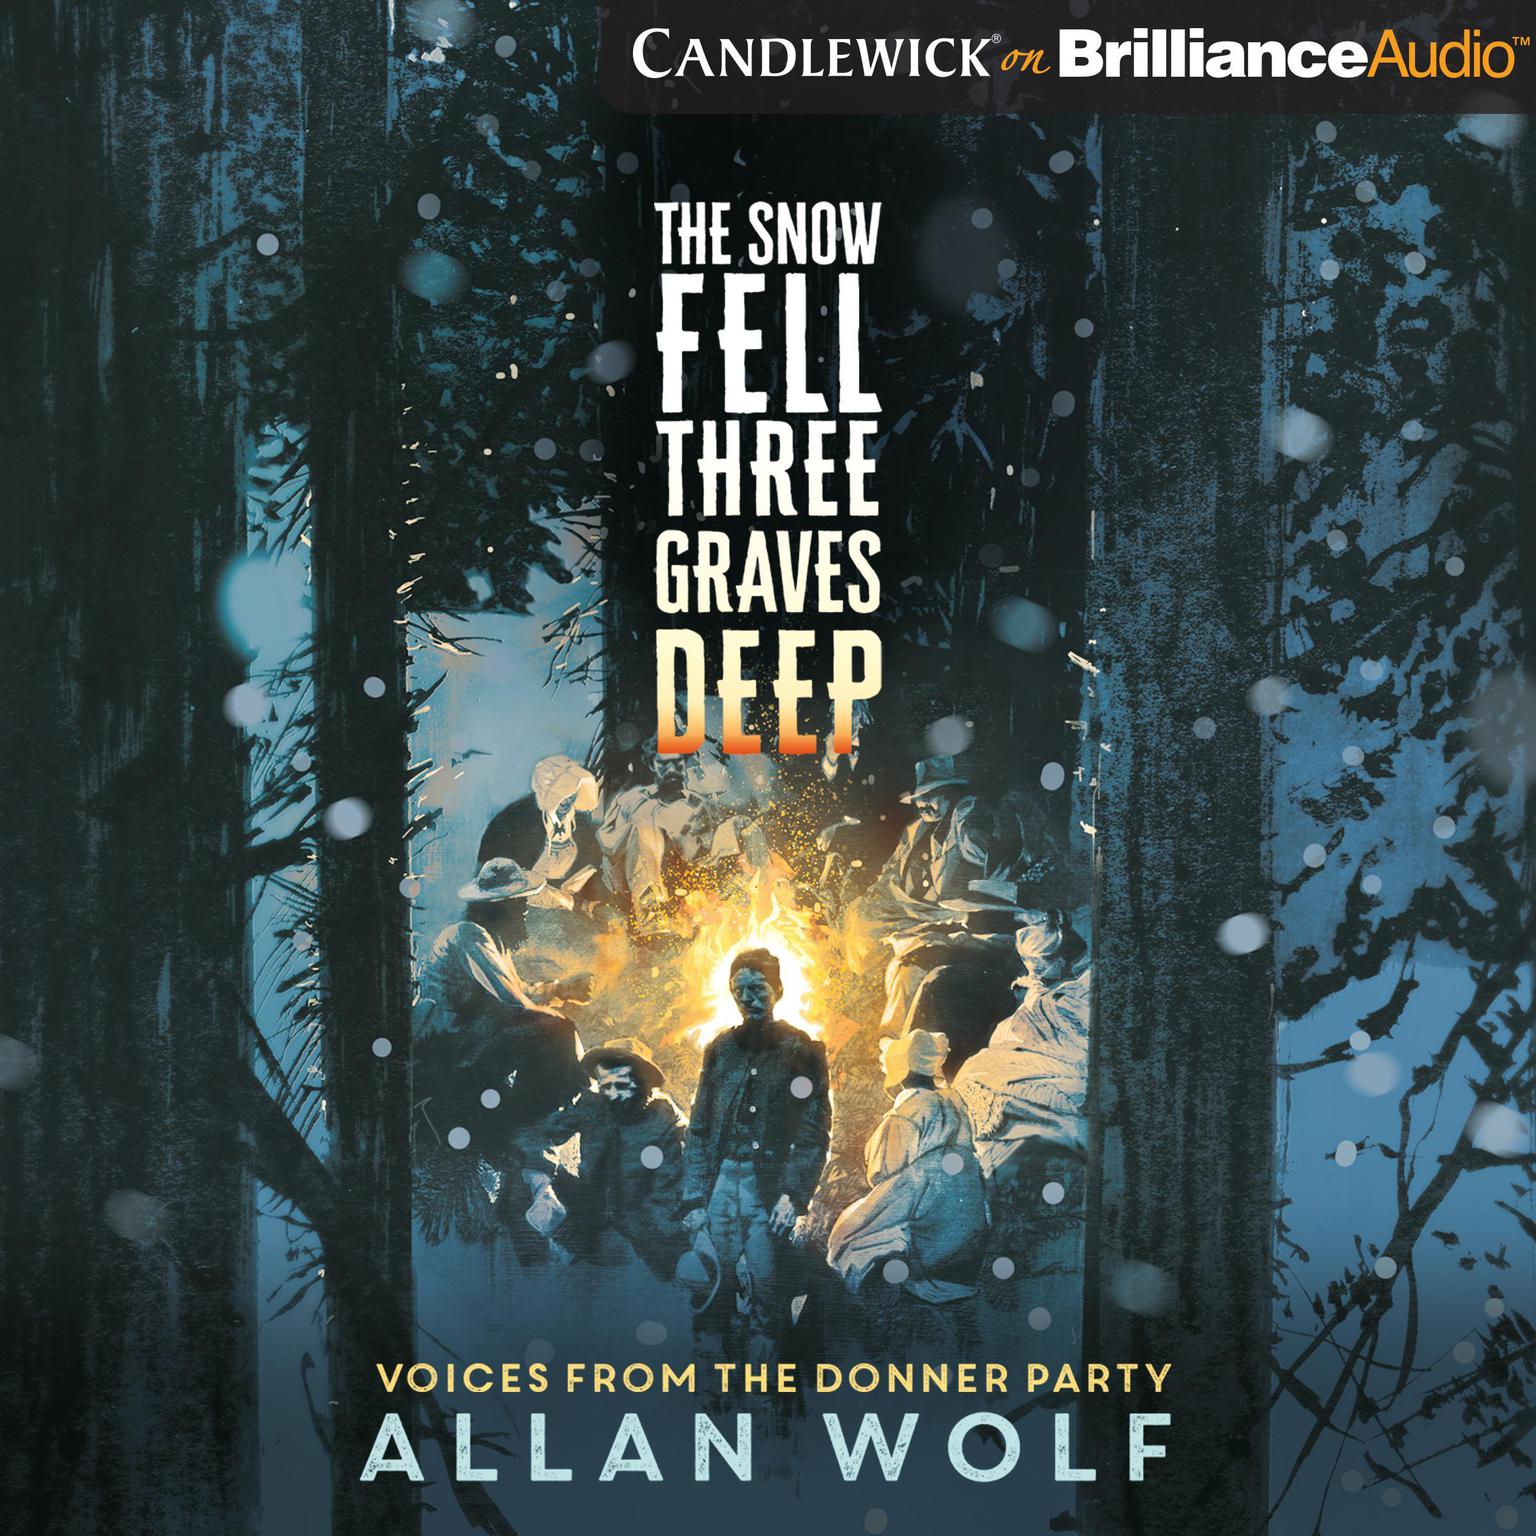 The Snow Fell Three Graves Deep: Voices from the Donner Party Audiobook, by Allan Wolf